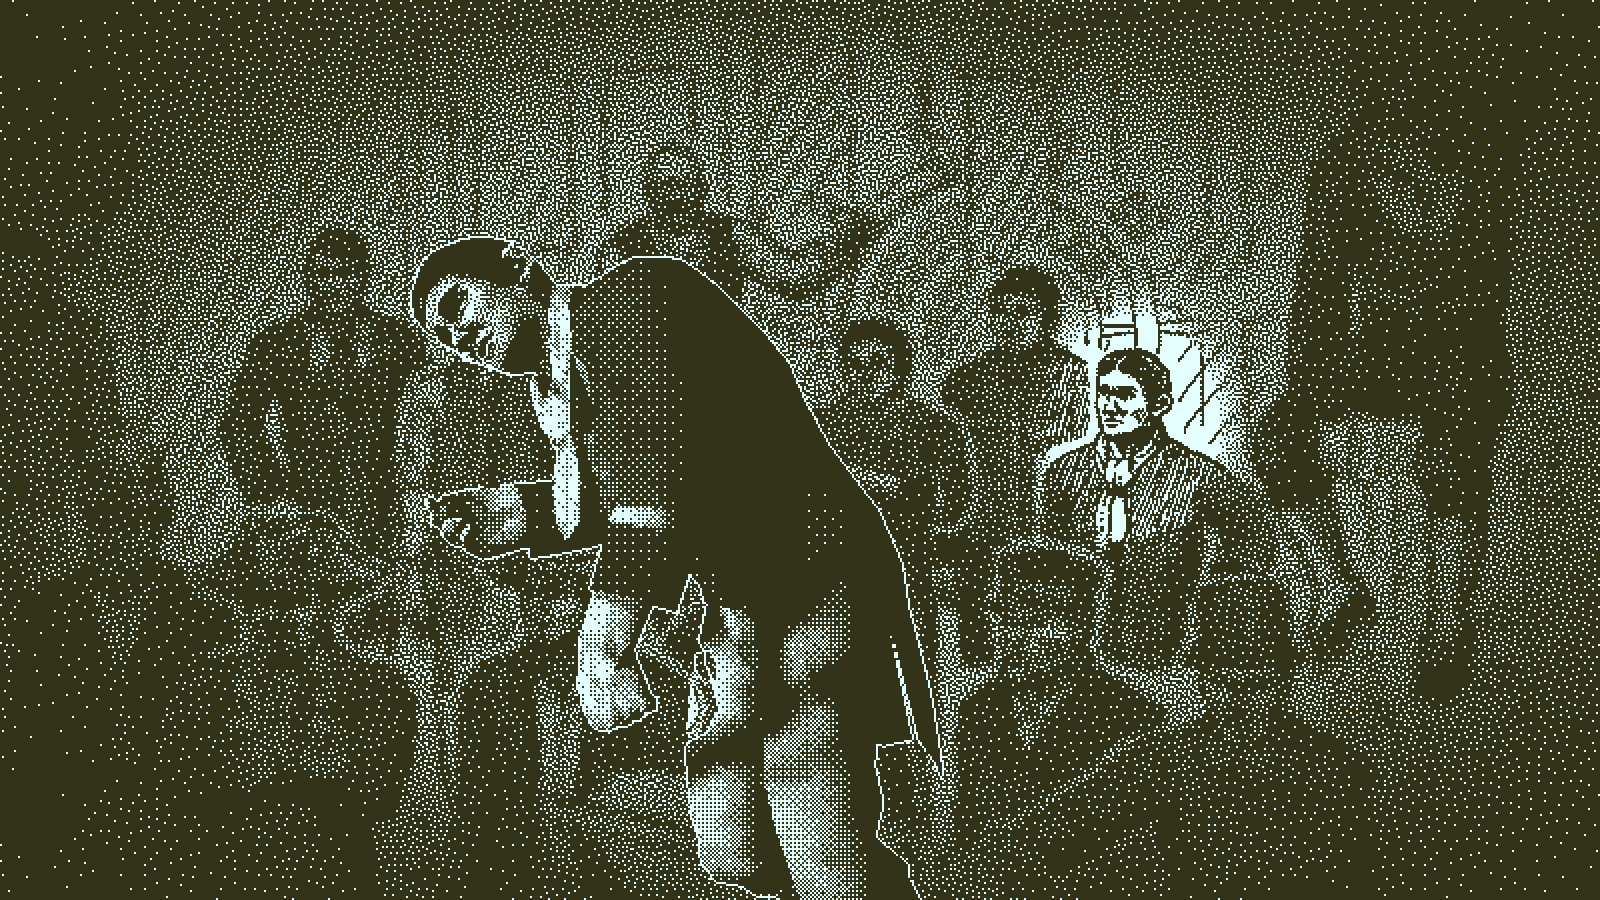 Return Of The Obra Dinn Leads The 2019 Independent Games Festival